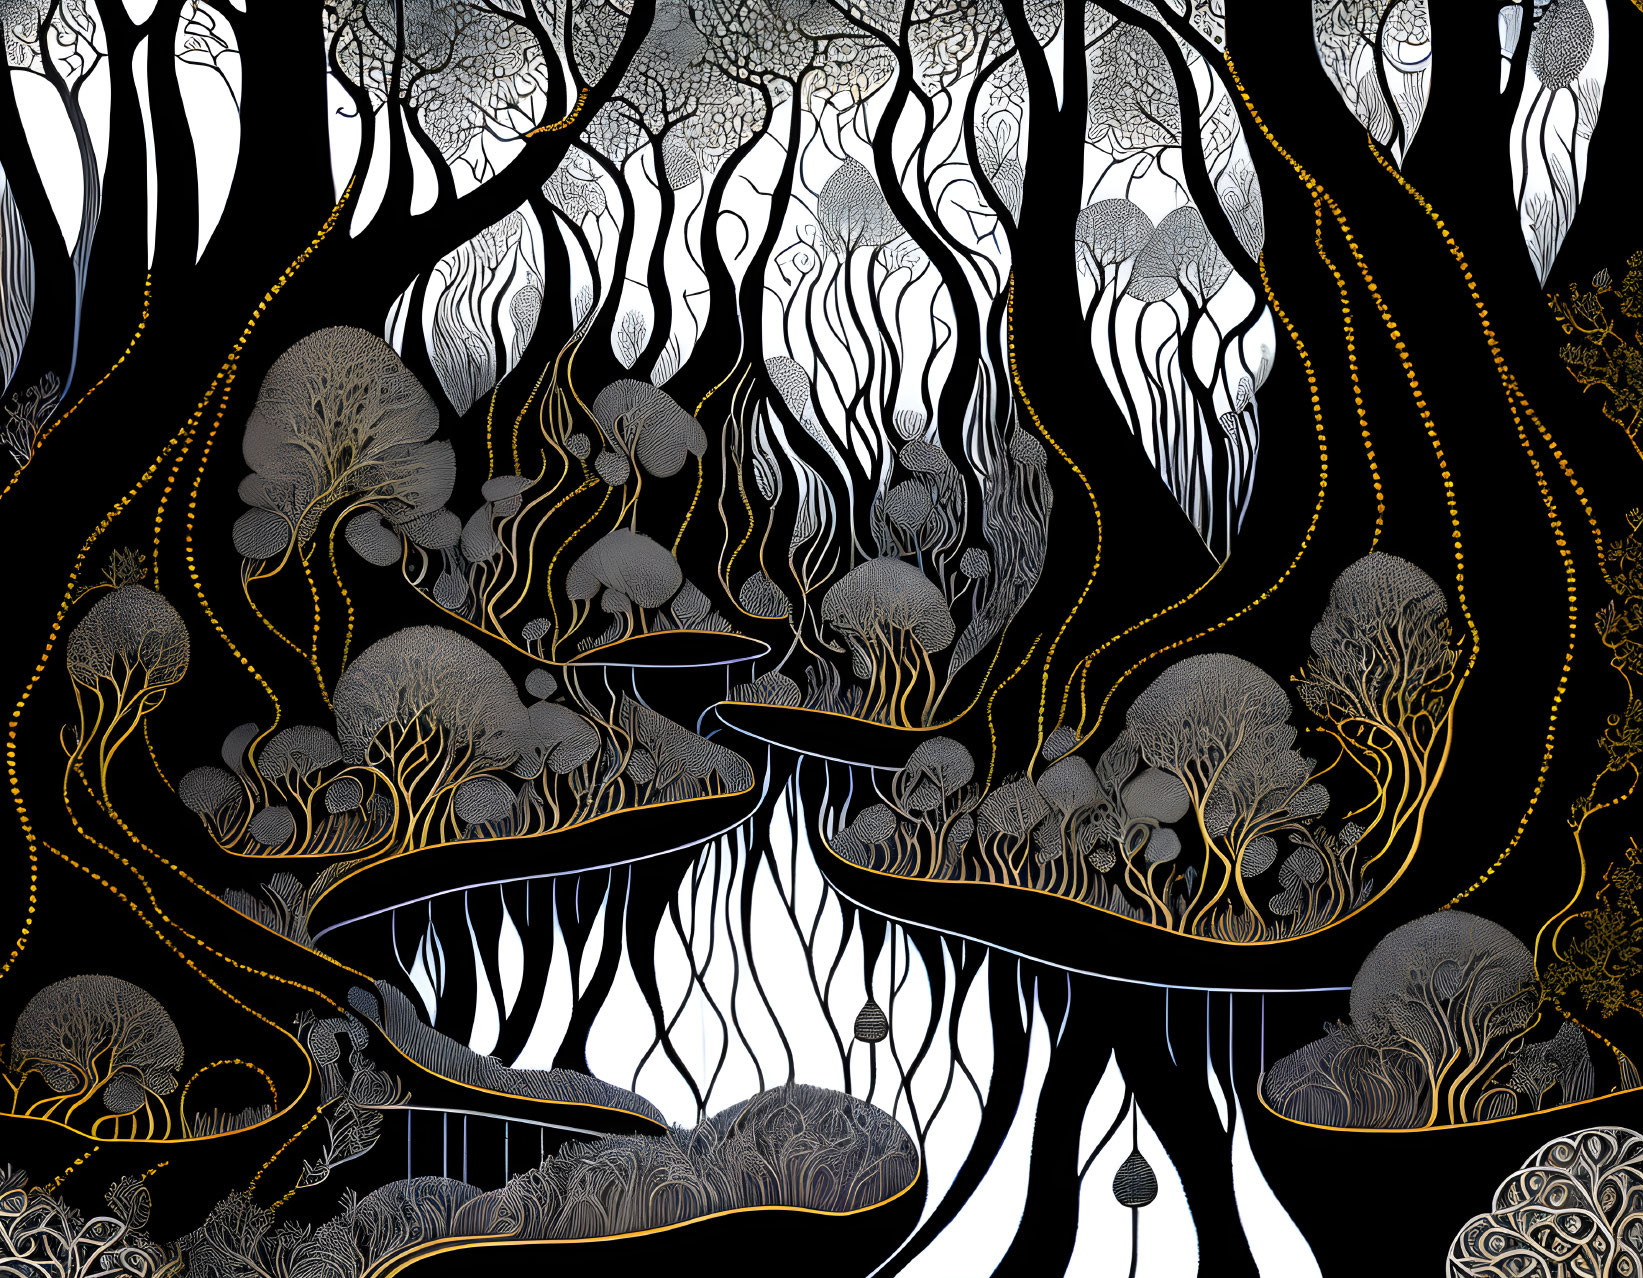 Detailed Black and White Forest Illustration with Gold Accents